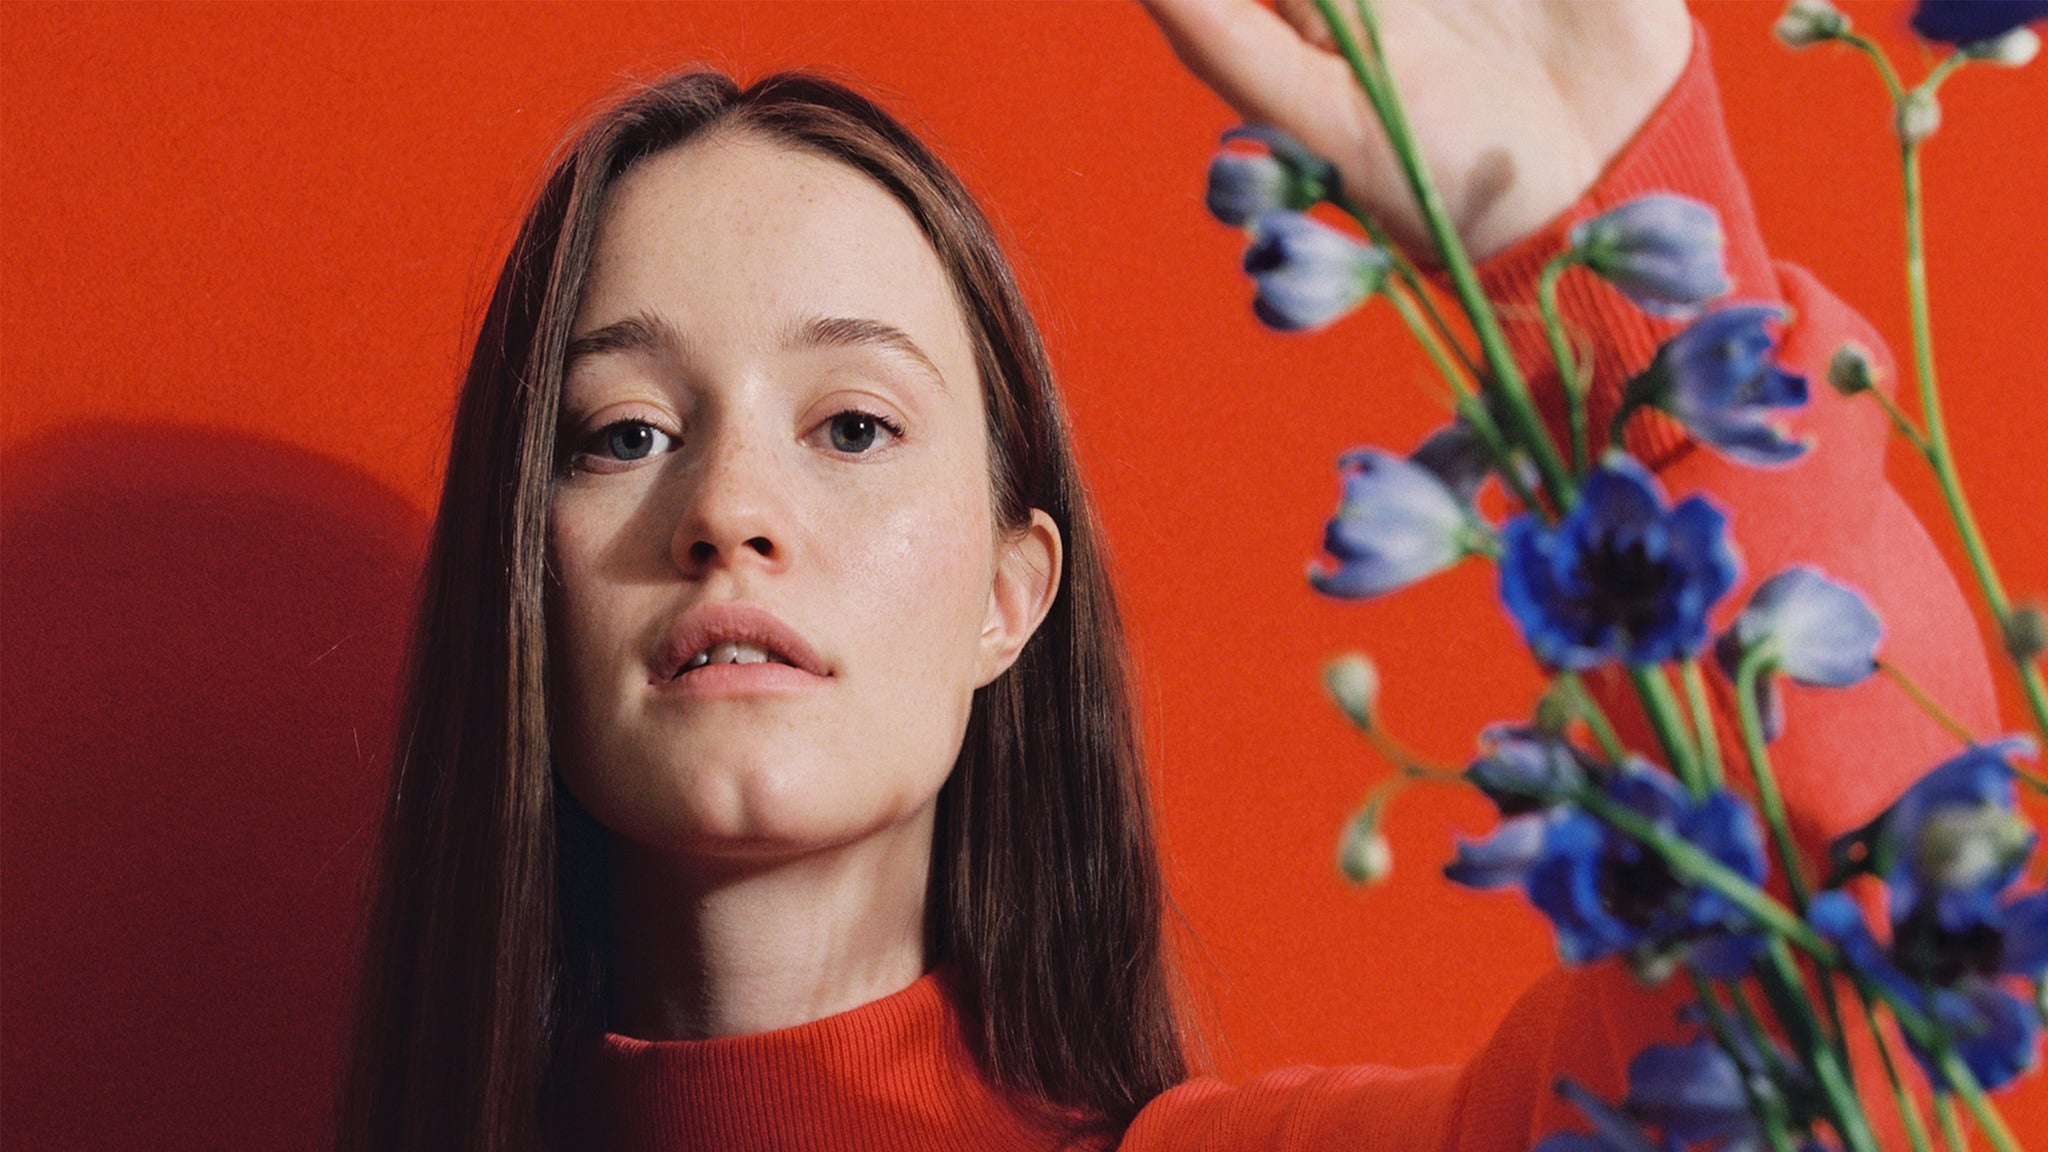 Sigrid: The 'Sucker Punch' Tour in New York promo photo for Spotify presale offer code